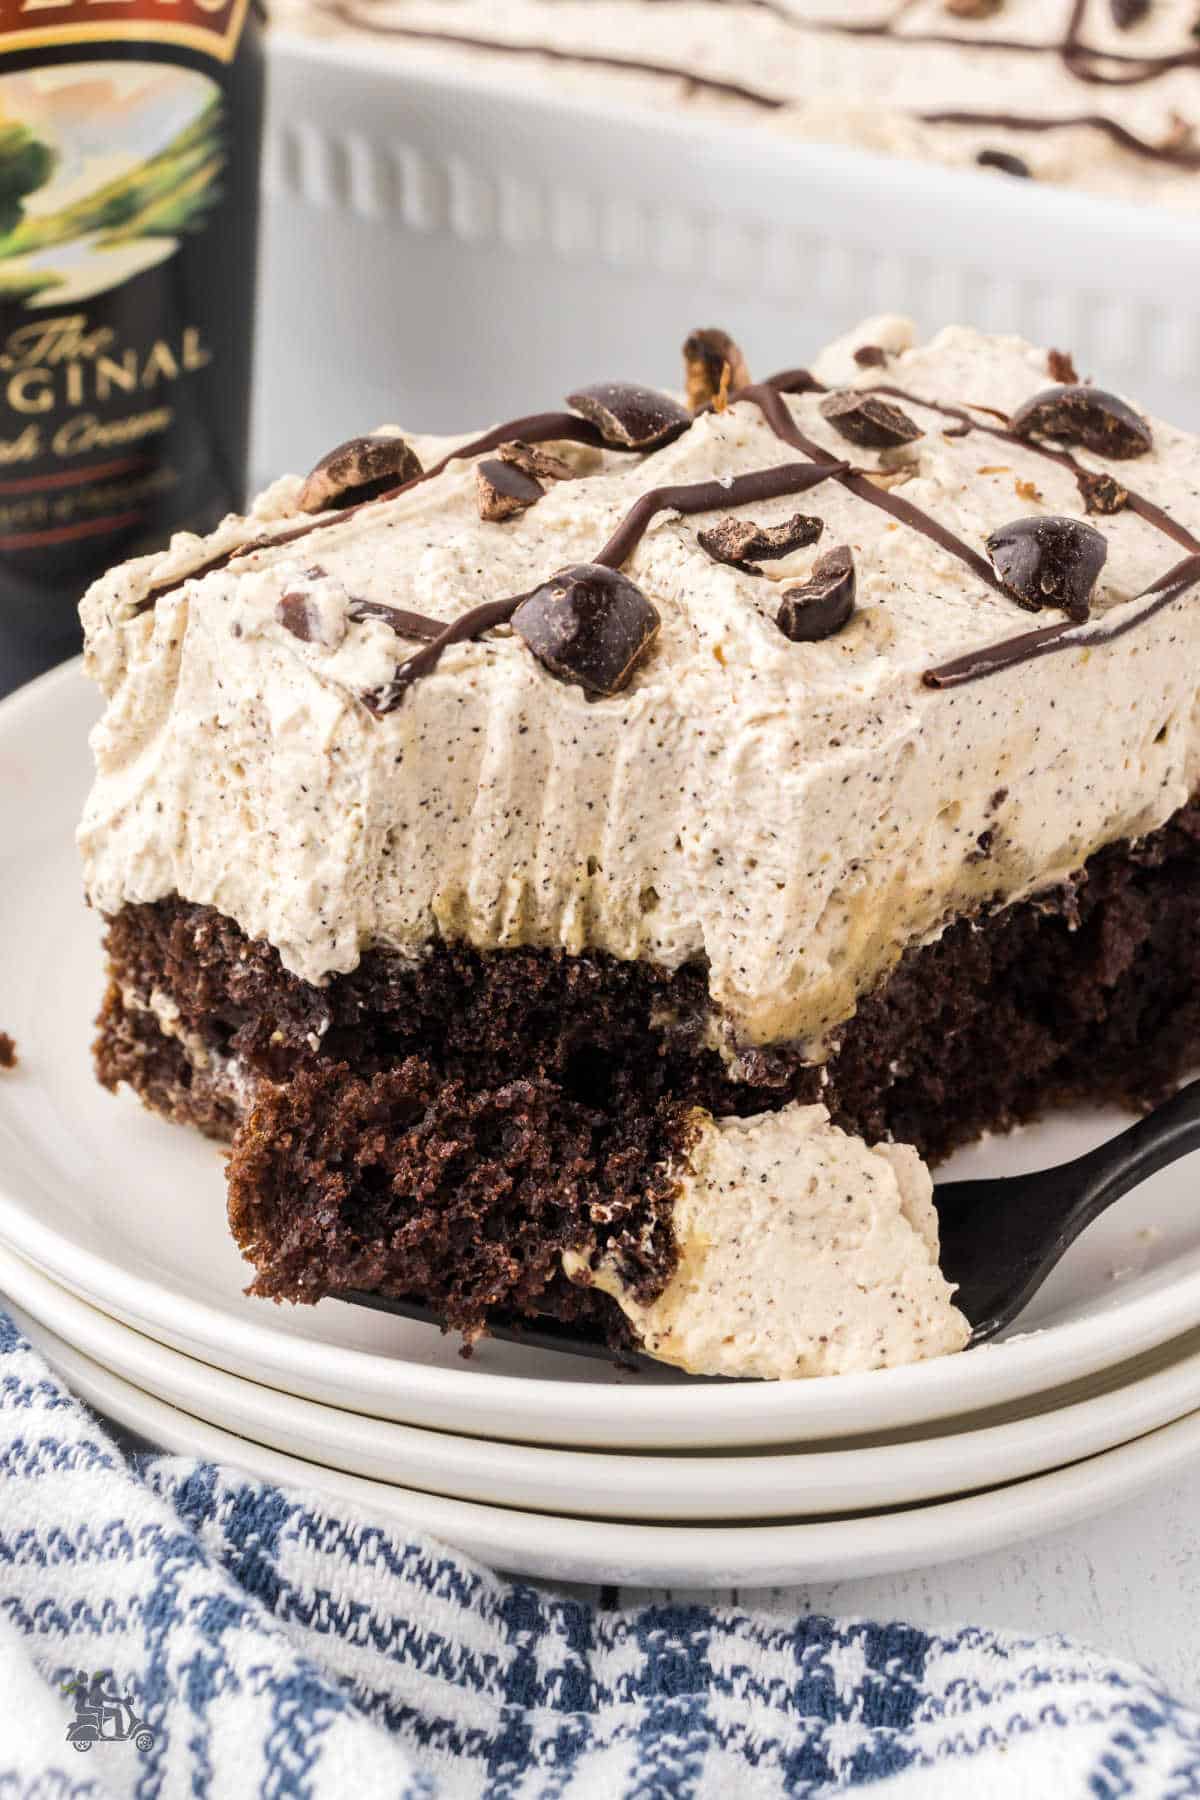 A fork cuts into the chocolate poke cake square showing the thick Bailey's Irish Cream flavored whipped cream topping. 